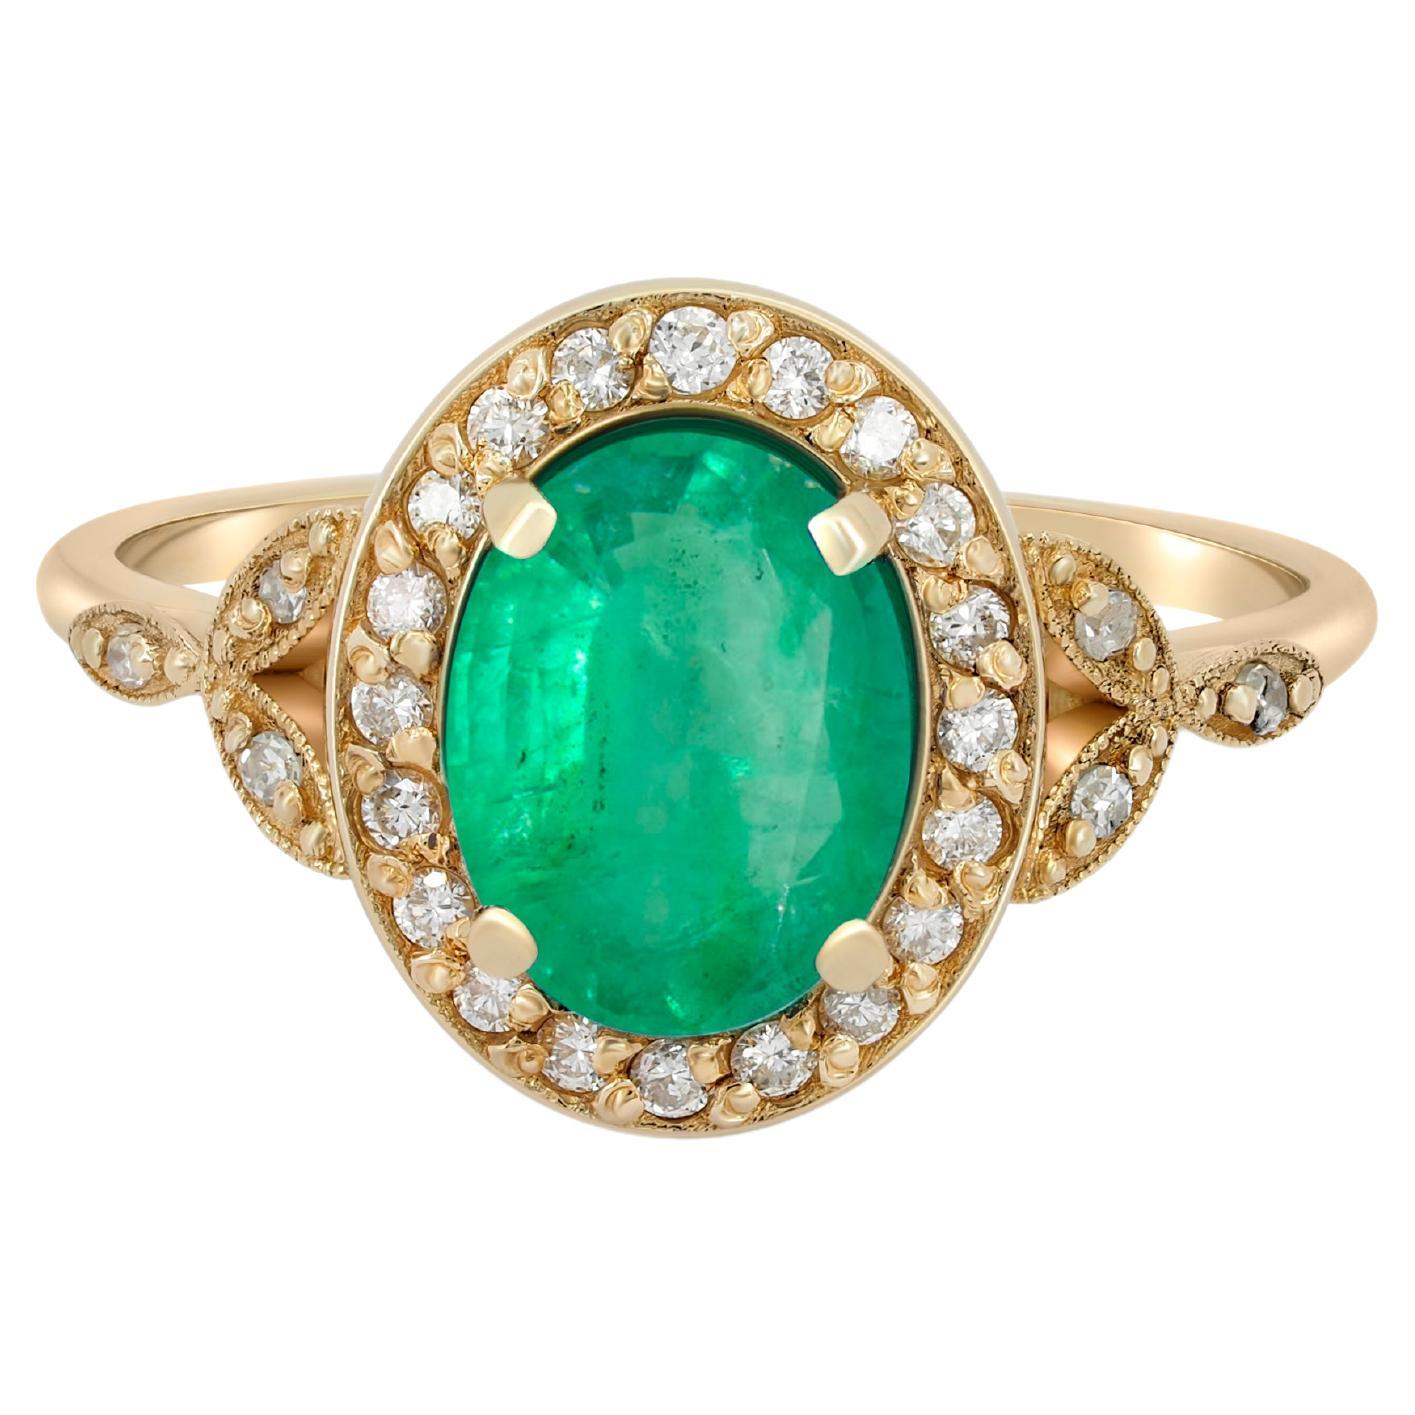 For Sale:  Emerald vintage style gold ring.